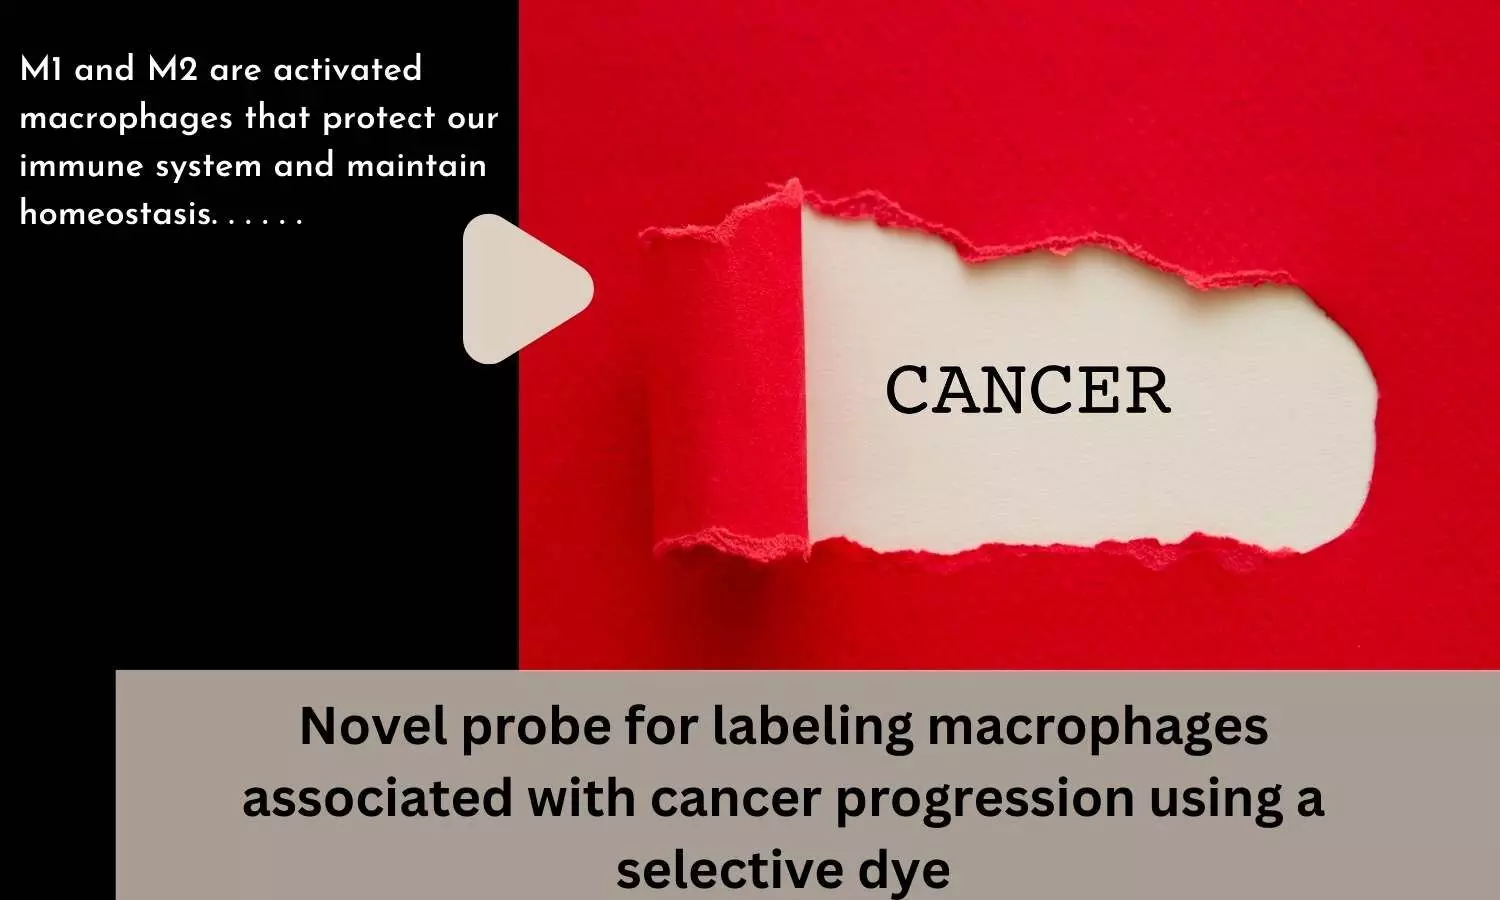 Novel probe for labeling macrophages associated with cancer progression using a selective dye